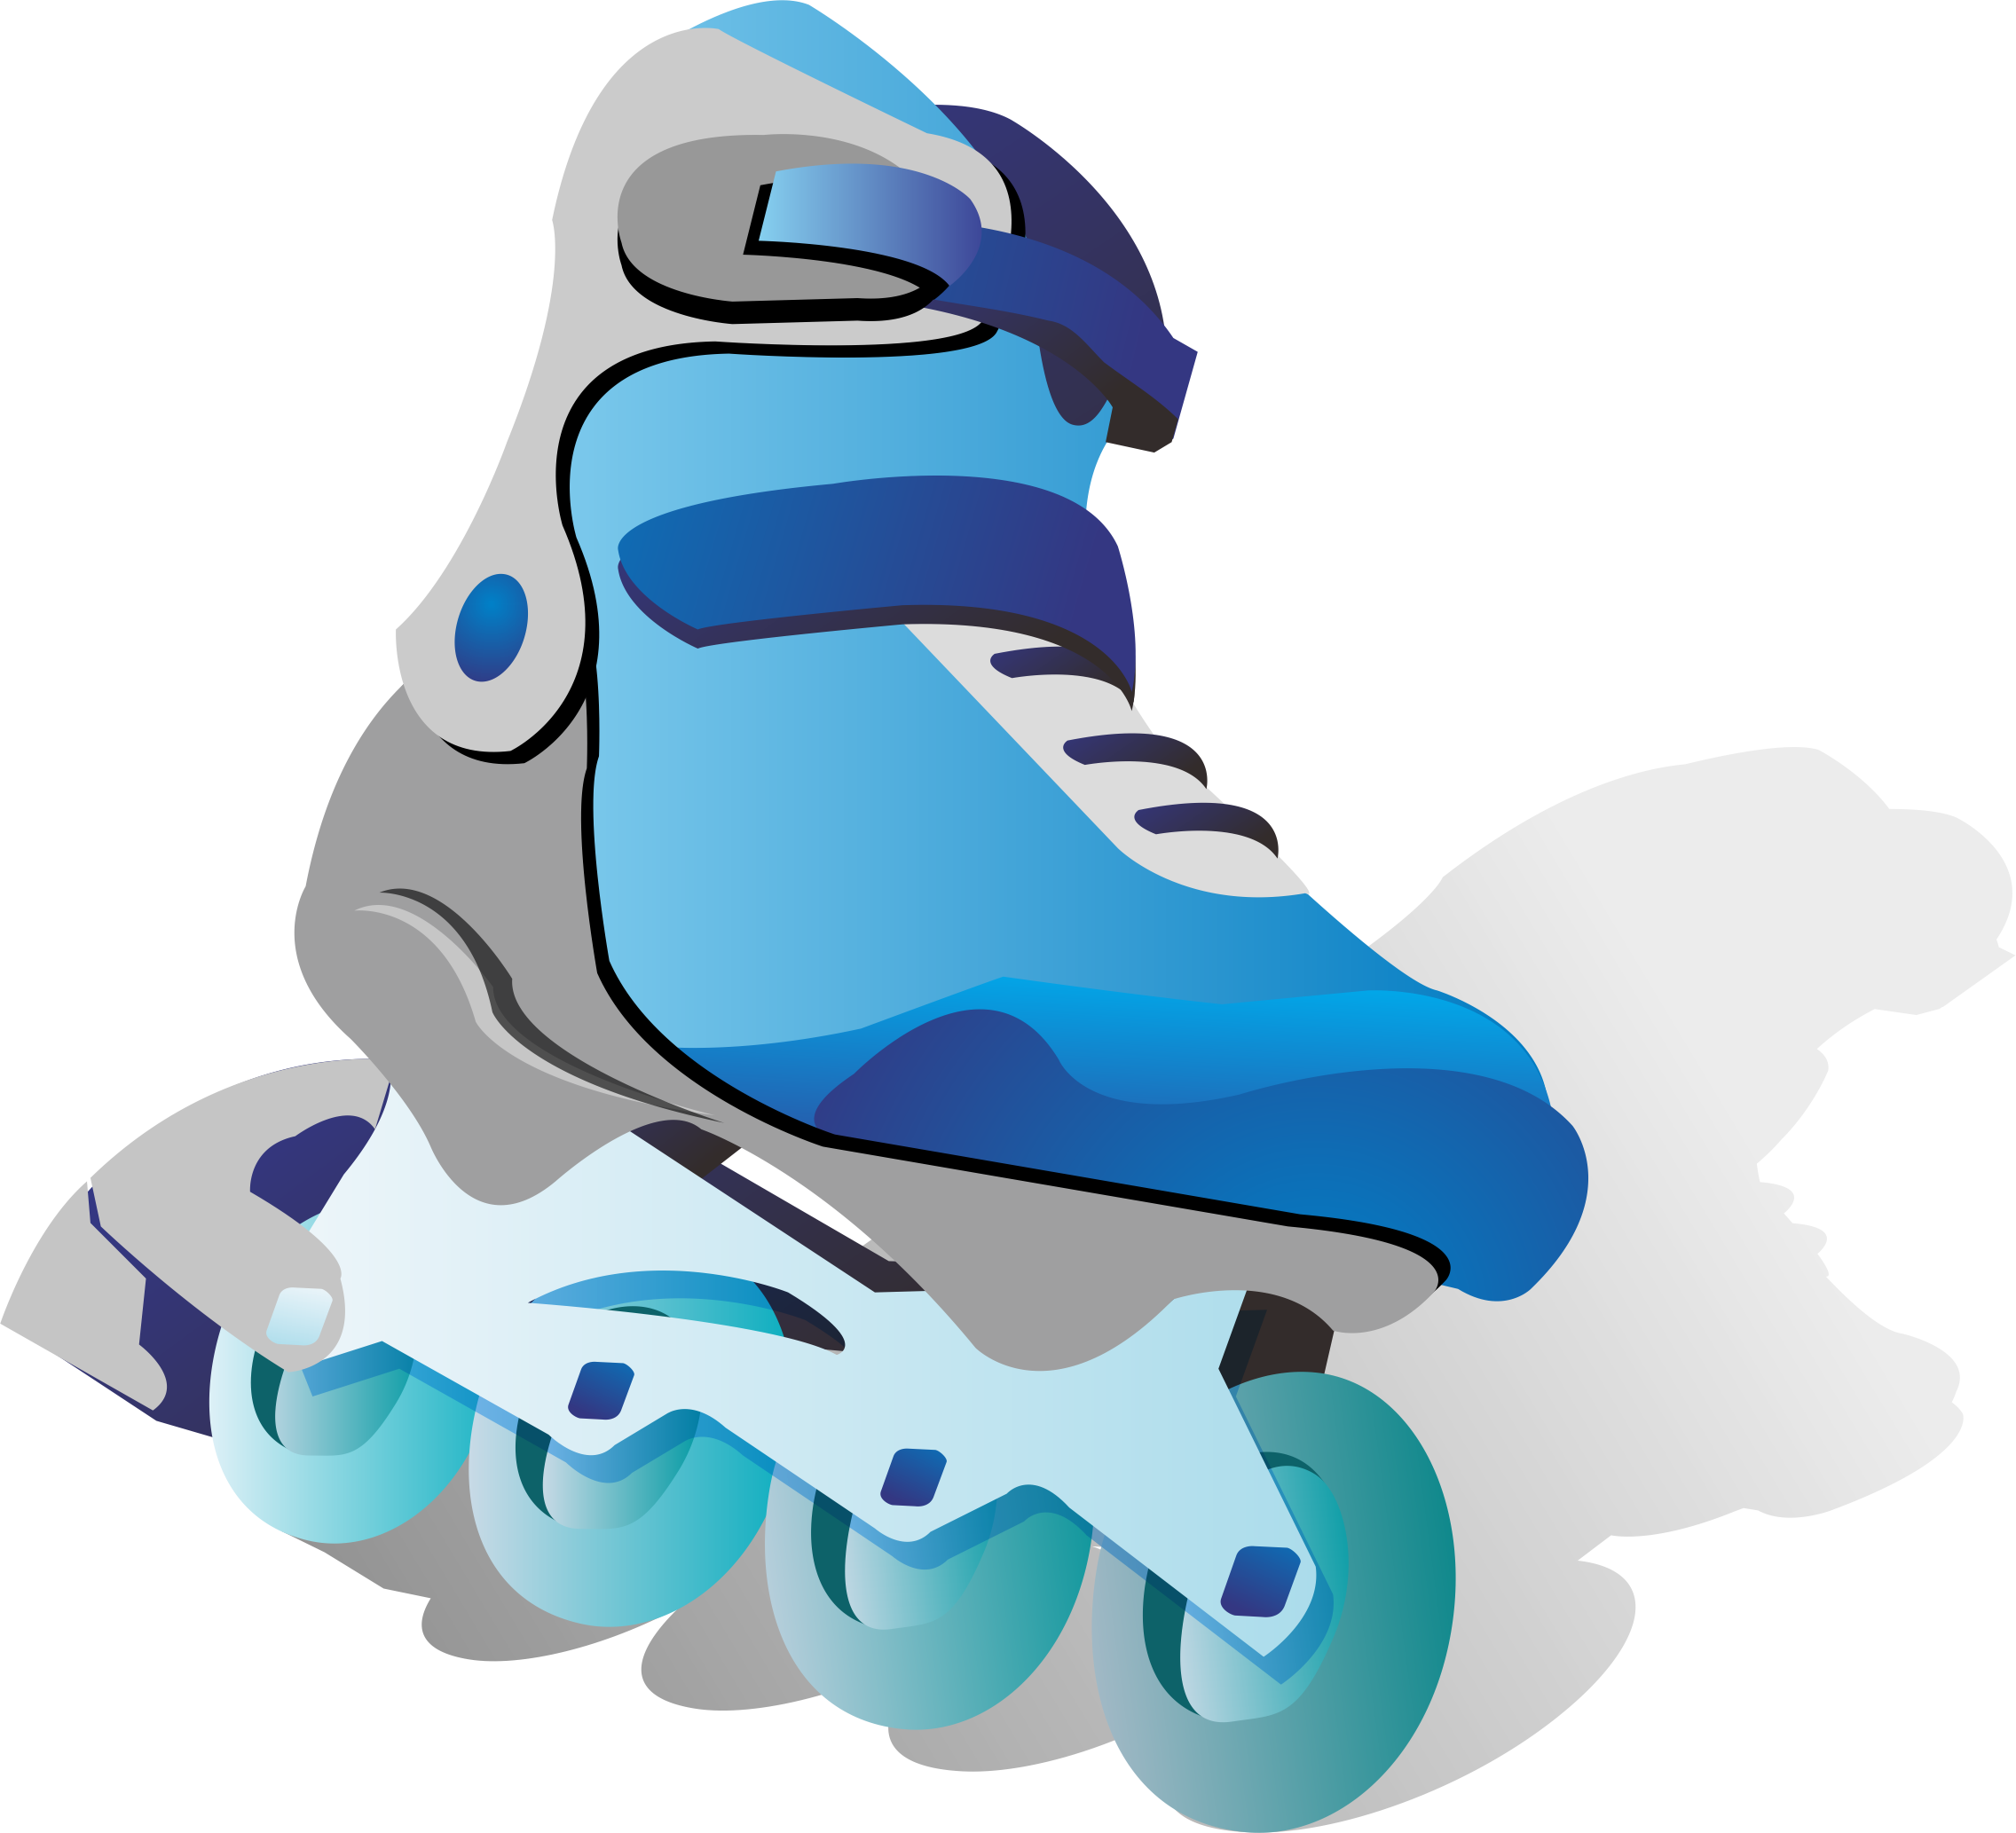 Download and share clipart about Roller Skating Skateboarding Euclidean - I...